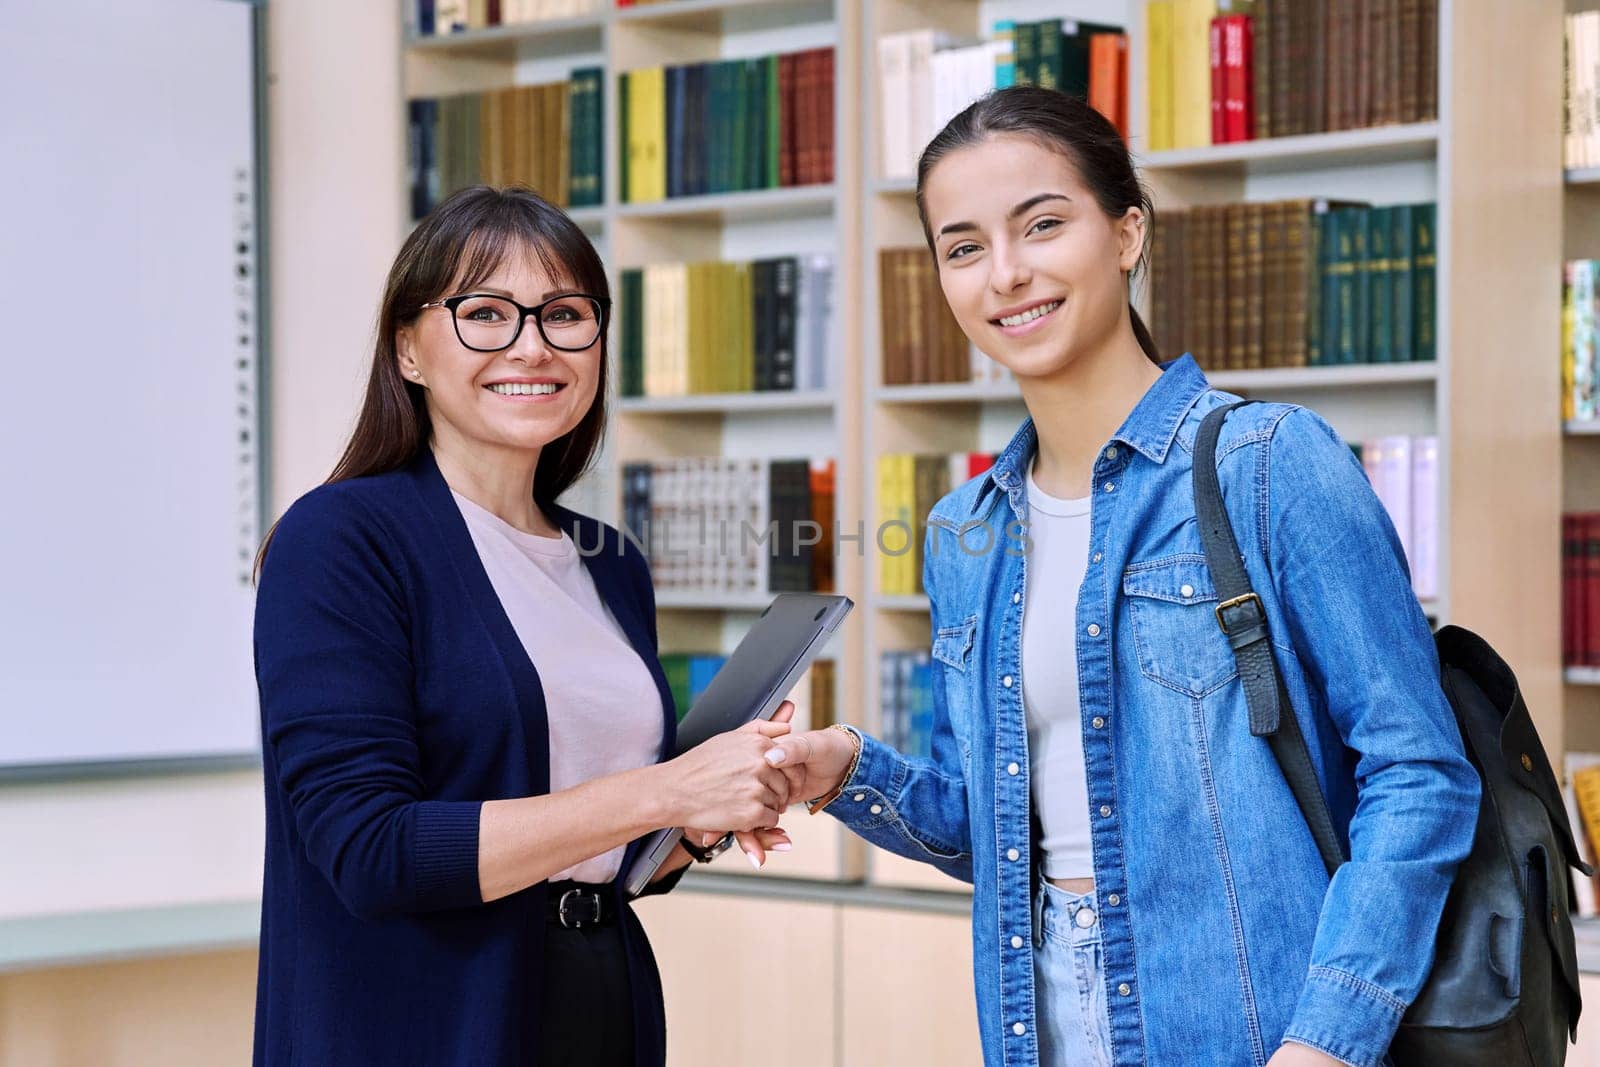 Female teacher talking to teenage girl high school student, shaking hands with each other, inside educational building library office. Education, training, teaching, adolescence youth concept